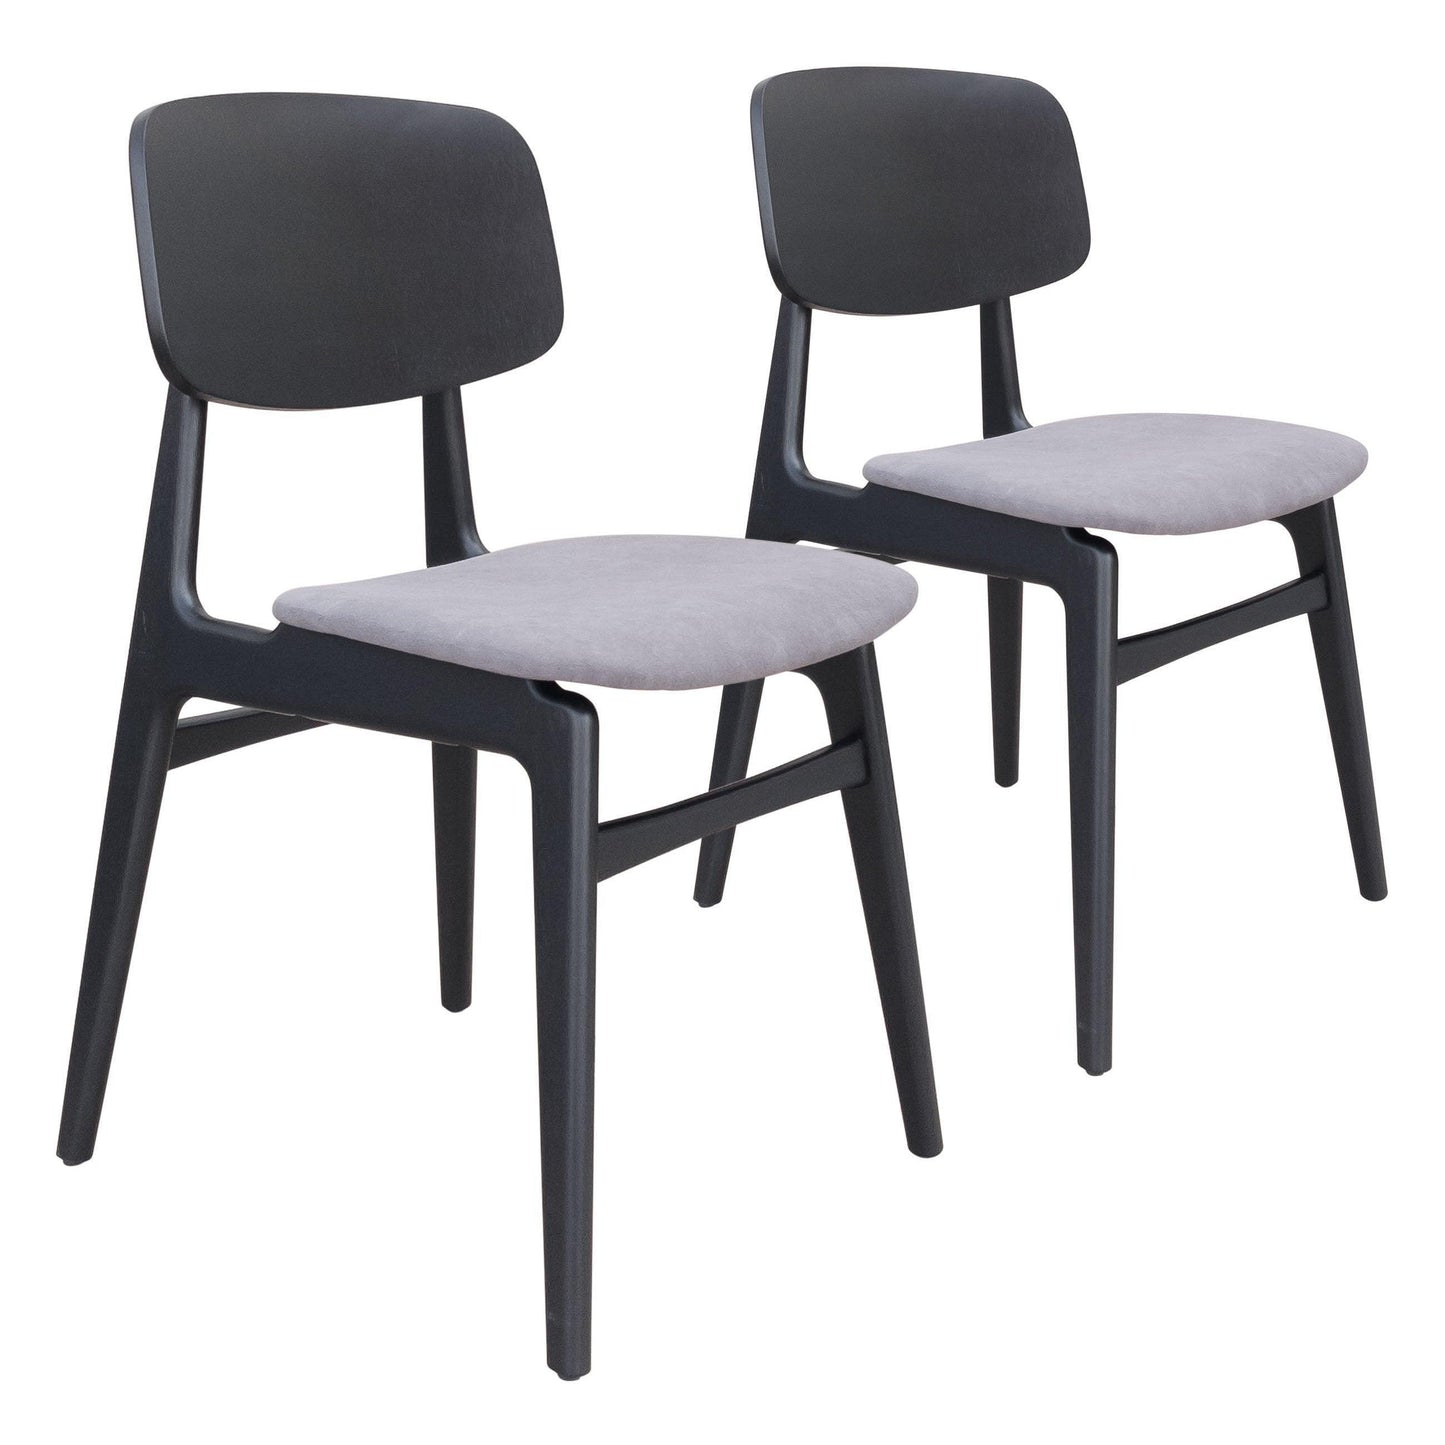 Othello Dining Chair (Set of 2) Gray & Black - Sideboards and Things Accents_Black, Back Type_With Back, Brand_Zuo Modern, Color_Black, Color_Gray, Depth_20-30, Height_30-40, Materials_Wood, Number of Pieces_2PC Set, Product Type_Dining Height, Upholstery Type_Fabric Blend, Upholstery Type_Polyester, Width_10-20, Wood Species_Rubberwood, Wood Species_Veneer